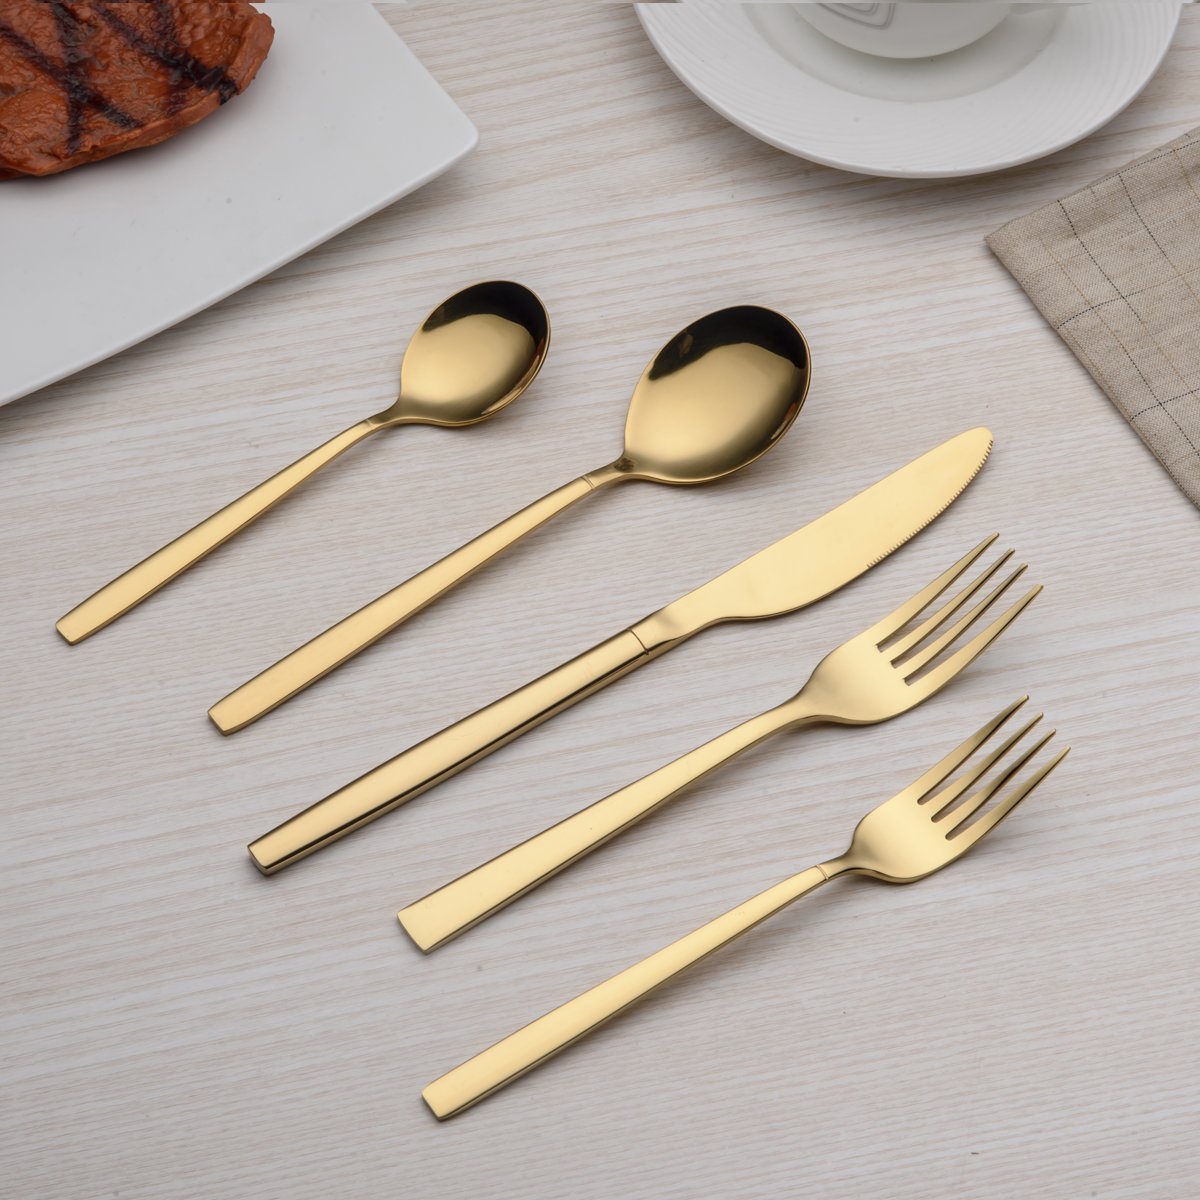 Stainless Steel With Titanium Gold Plated Silverware Cutlery Set Service For 8 Berglander Flatware Set 40 Piece Shiny Gold Golden Color Flatware Set 